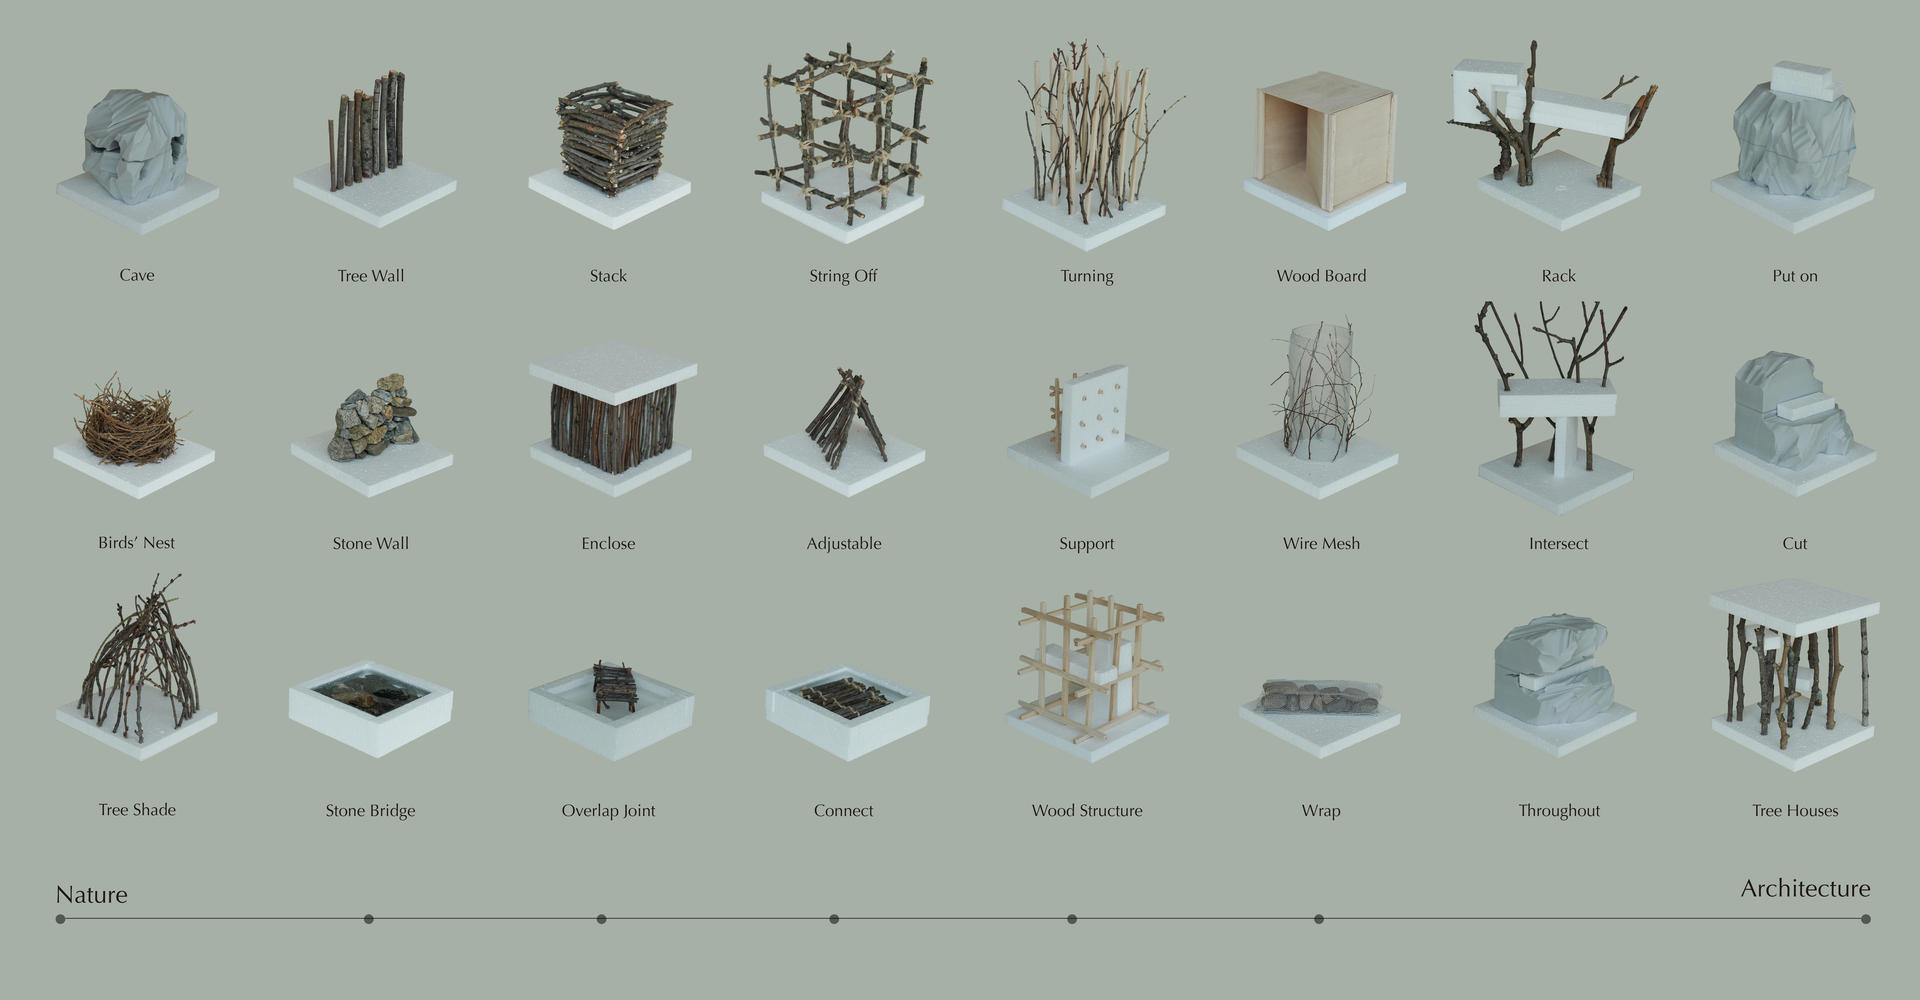 Conceptual models illustrate the transition between nature and architecture.